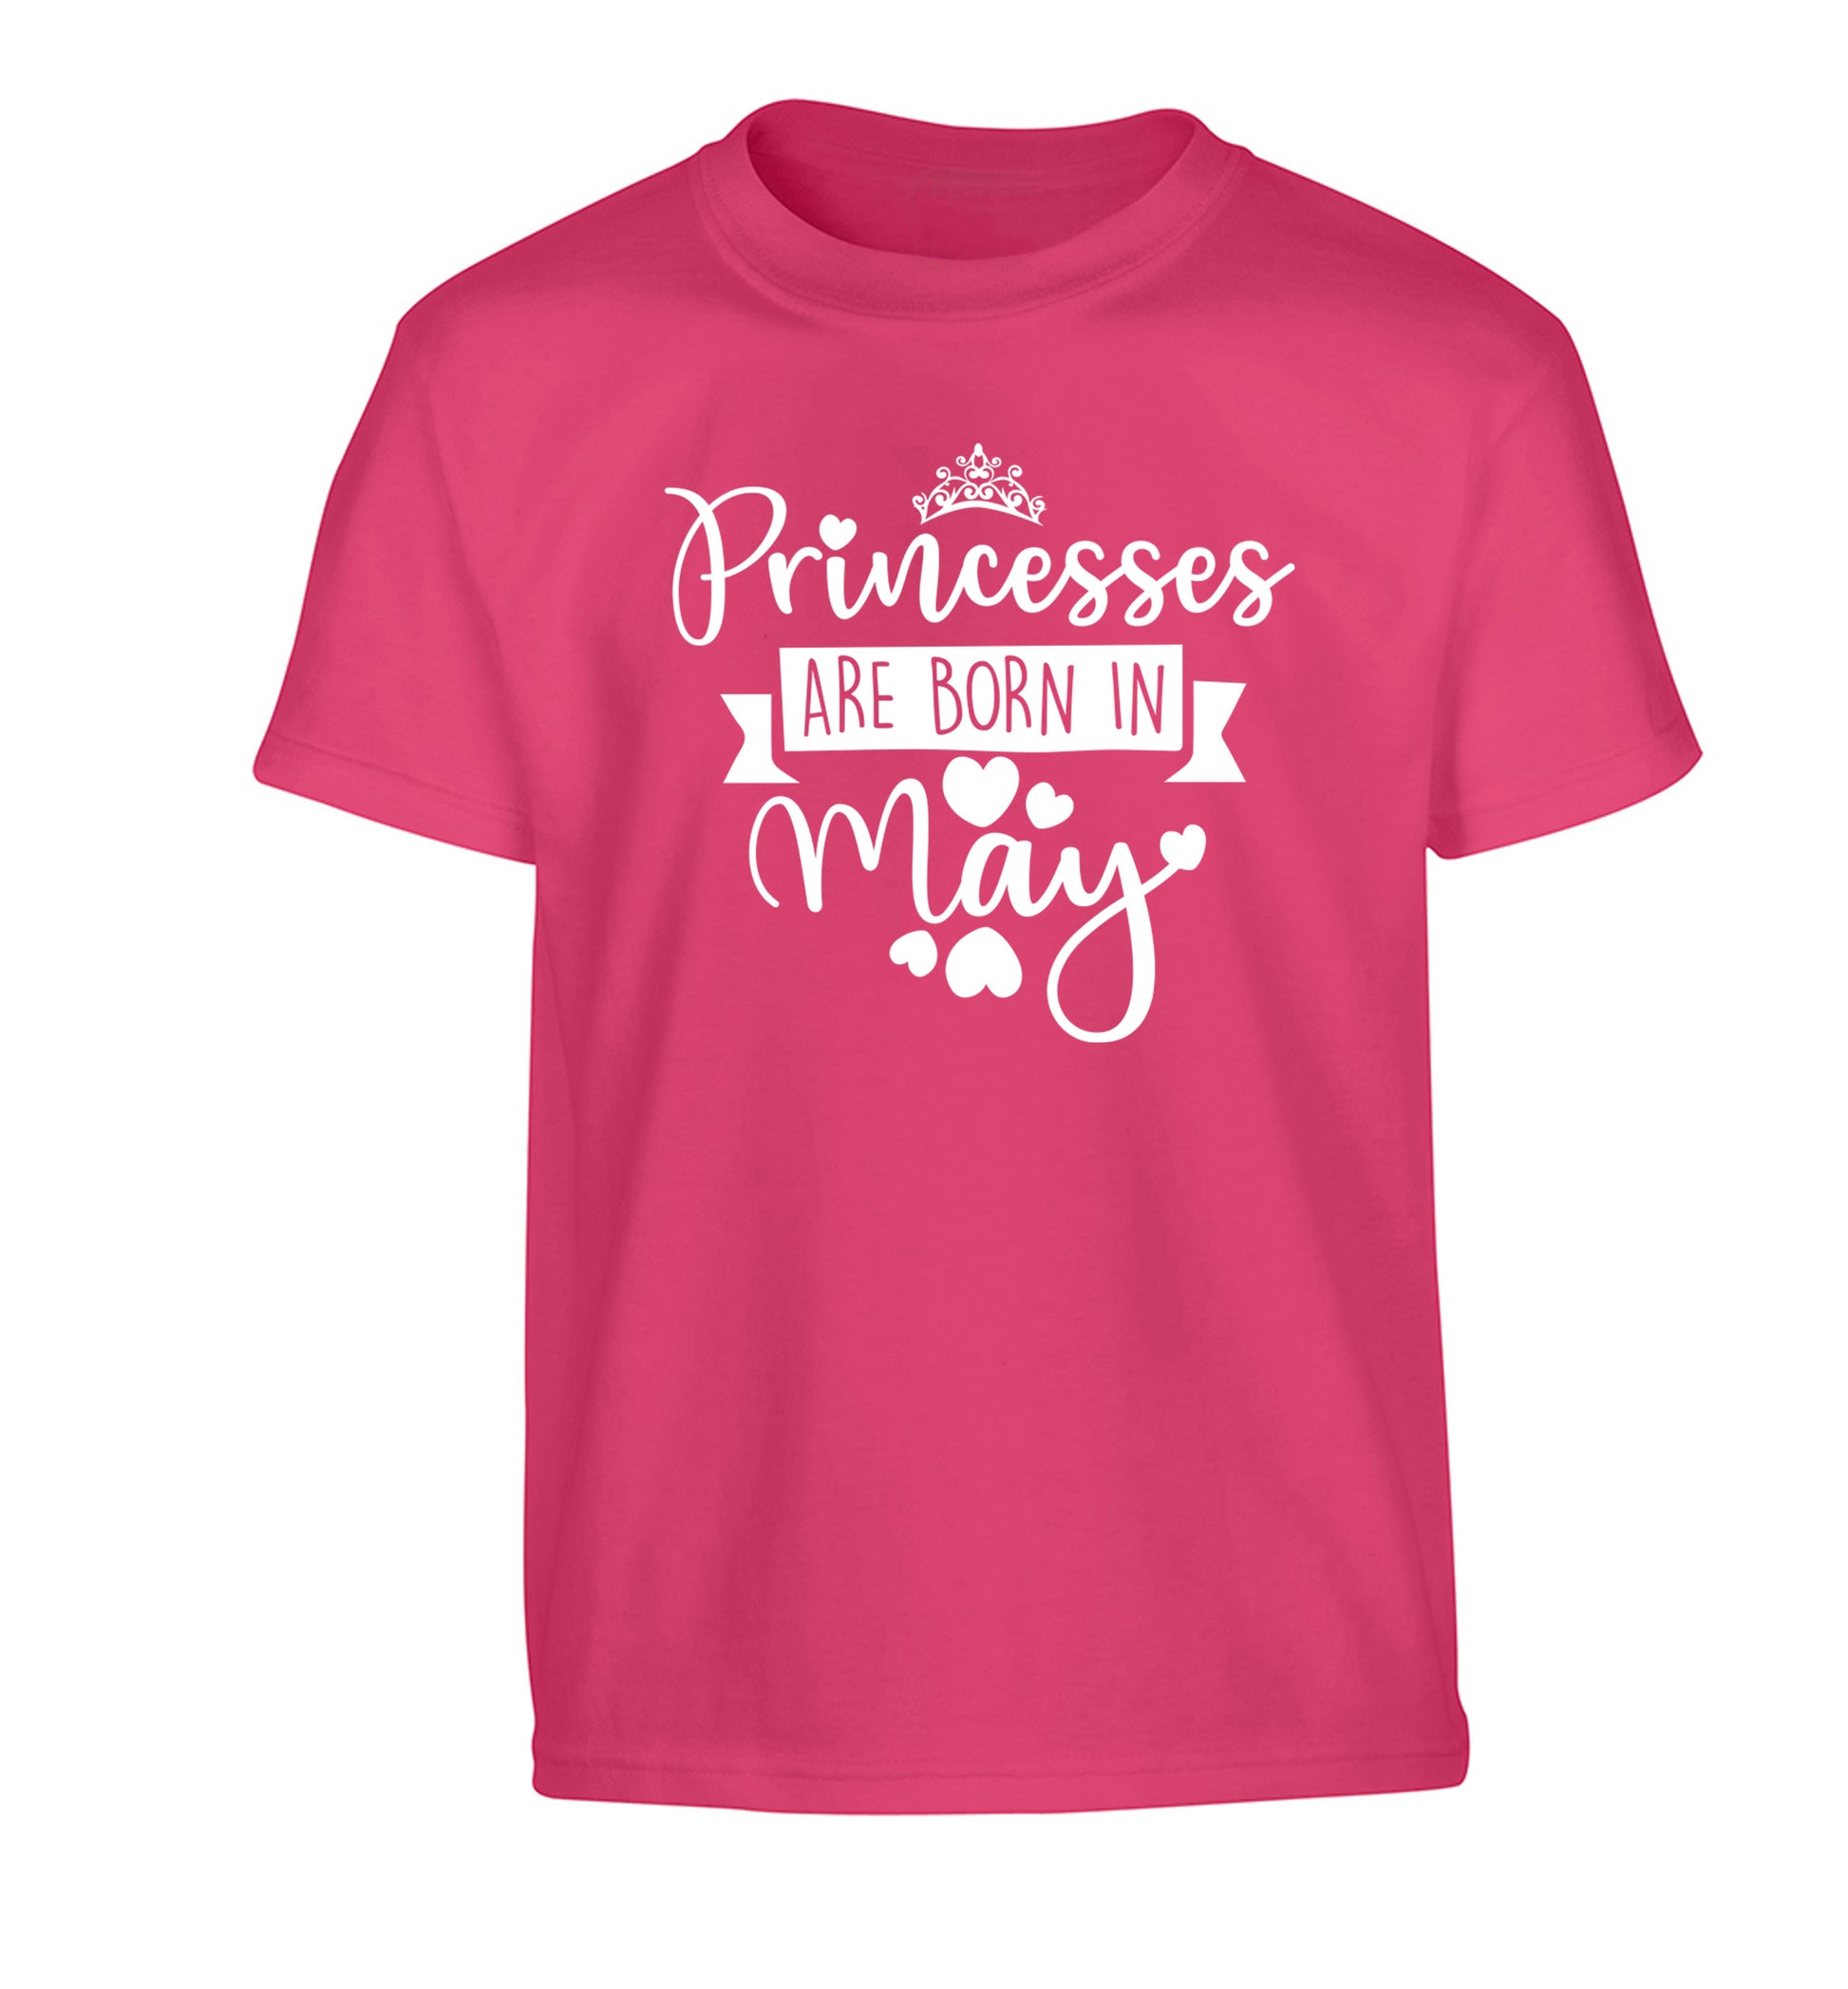 Princesses are born in May Children's pink Tshirt 12-13 Years